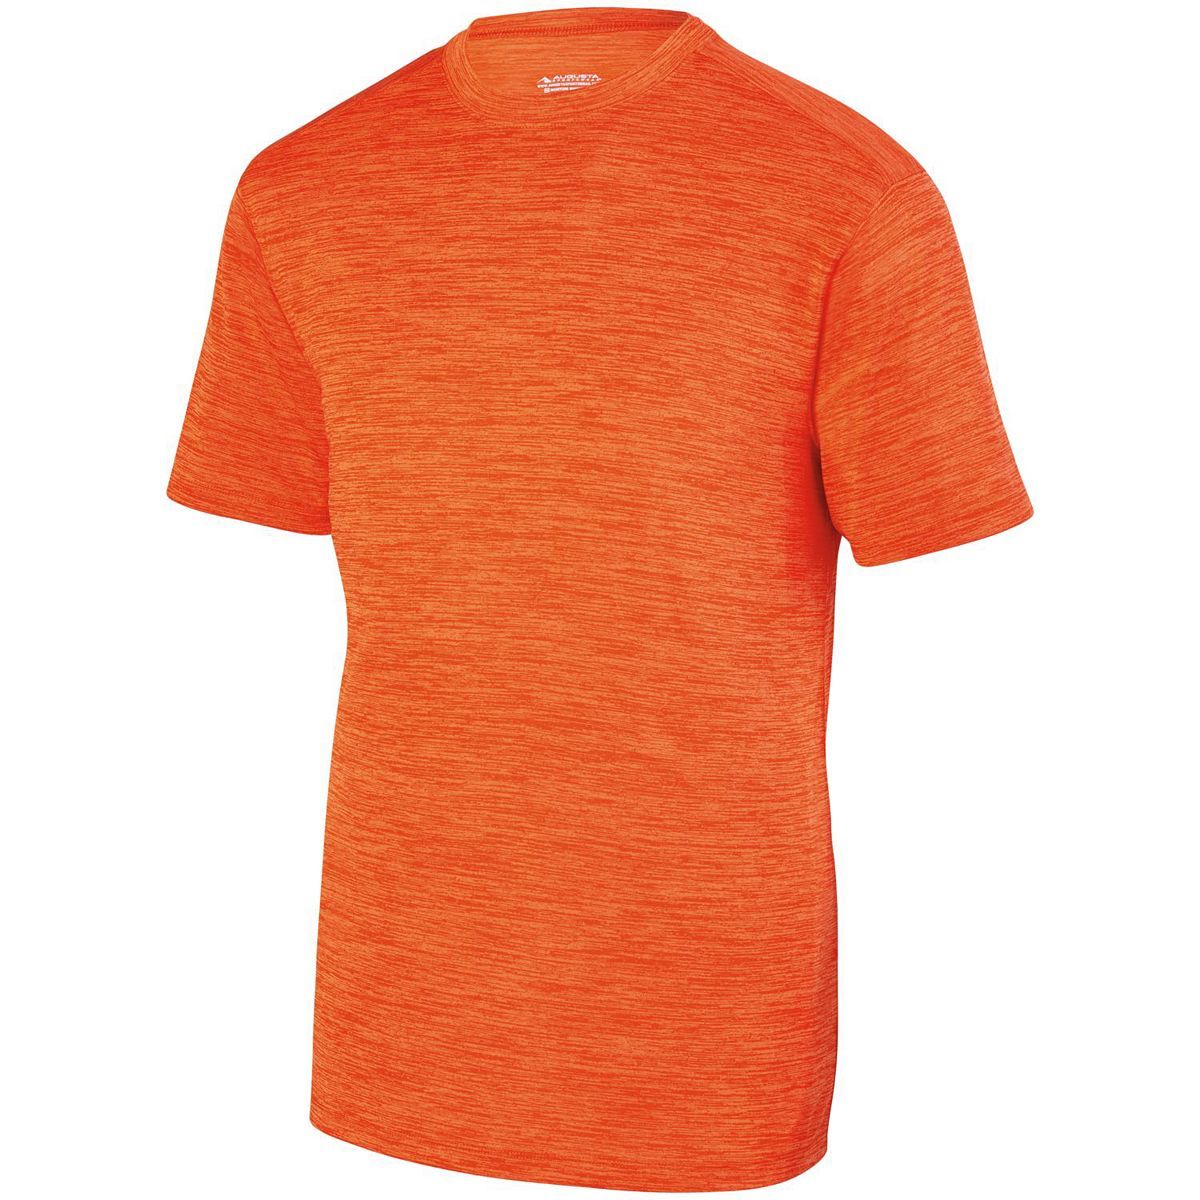 Augusta Sportswear Youth Shadow Tonal Heather Training Tee in Orange  -Part of the Youth, Youth-Tee-Shirt, T-Shirts, Augusta-Products, Shirts, Tonal-Fleece-Collection product lines at KanaleyCreations.com